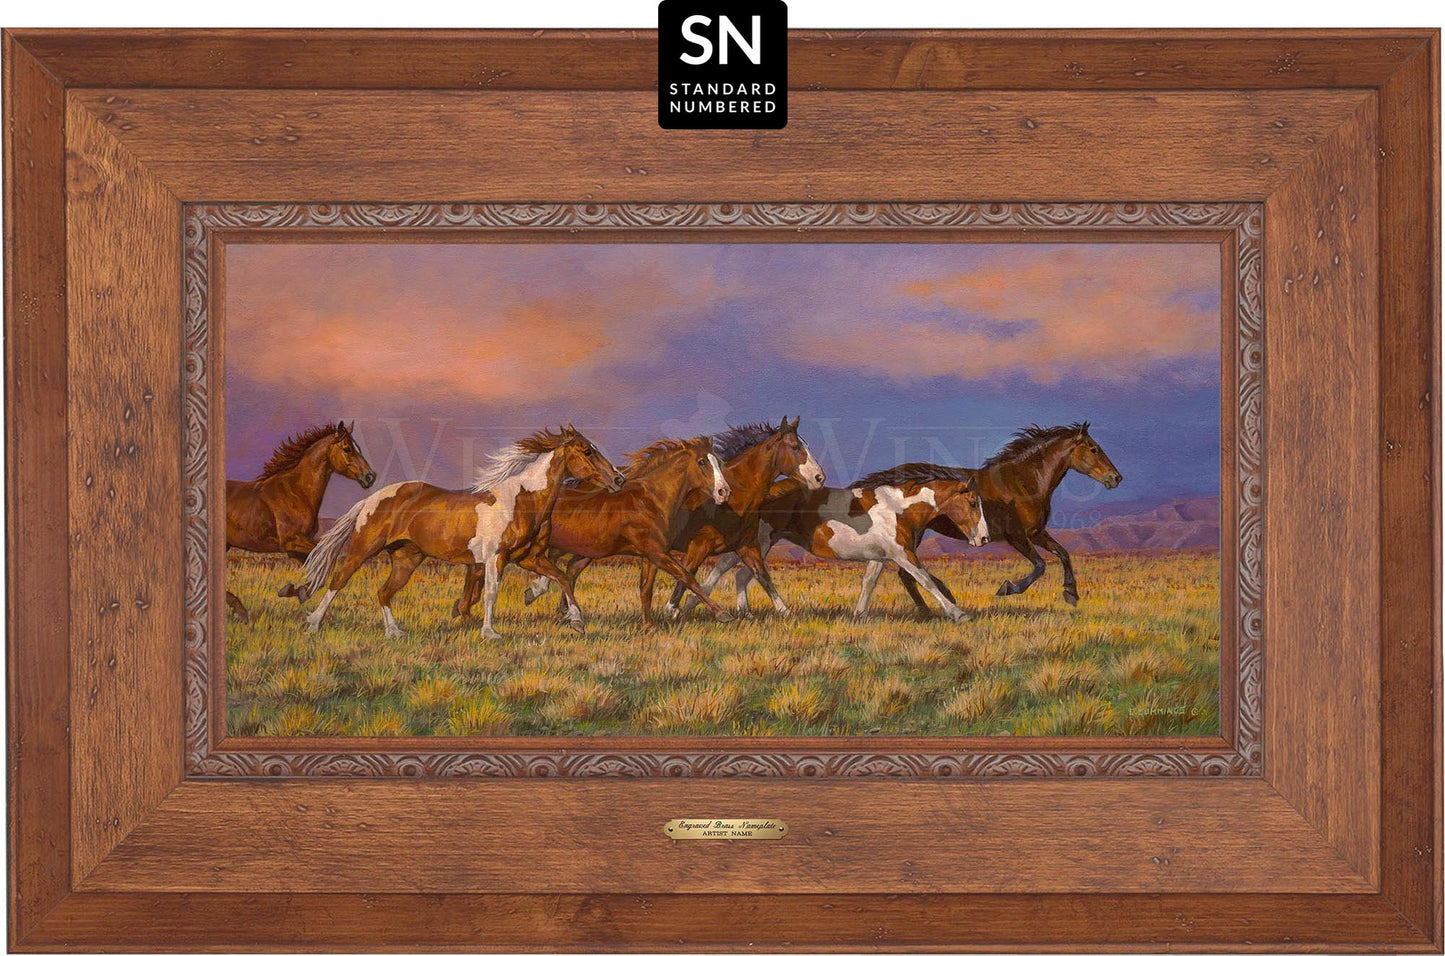 Unbroken—Horses; Standard Numbered Edition (SN) Master Artisan Canvas - Wild Wings